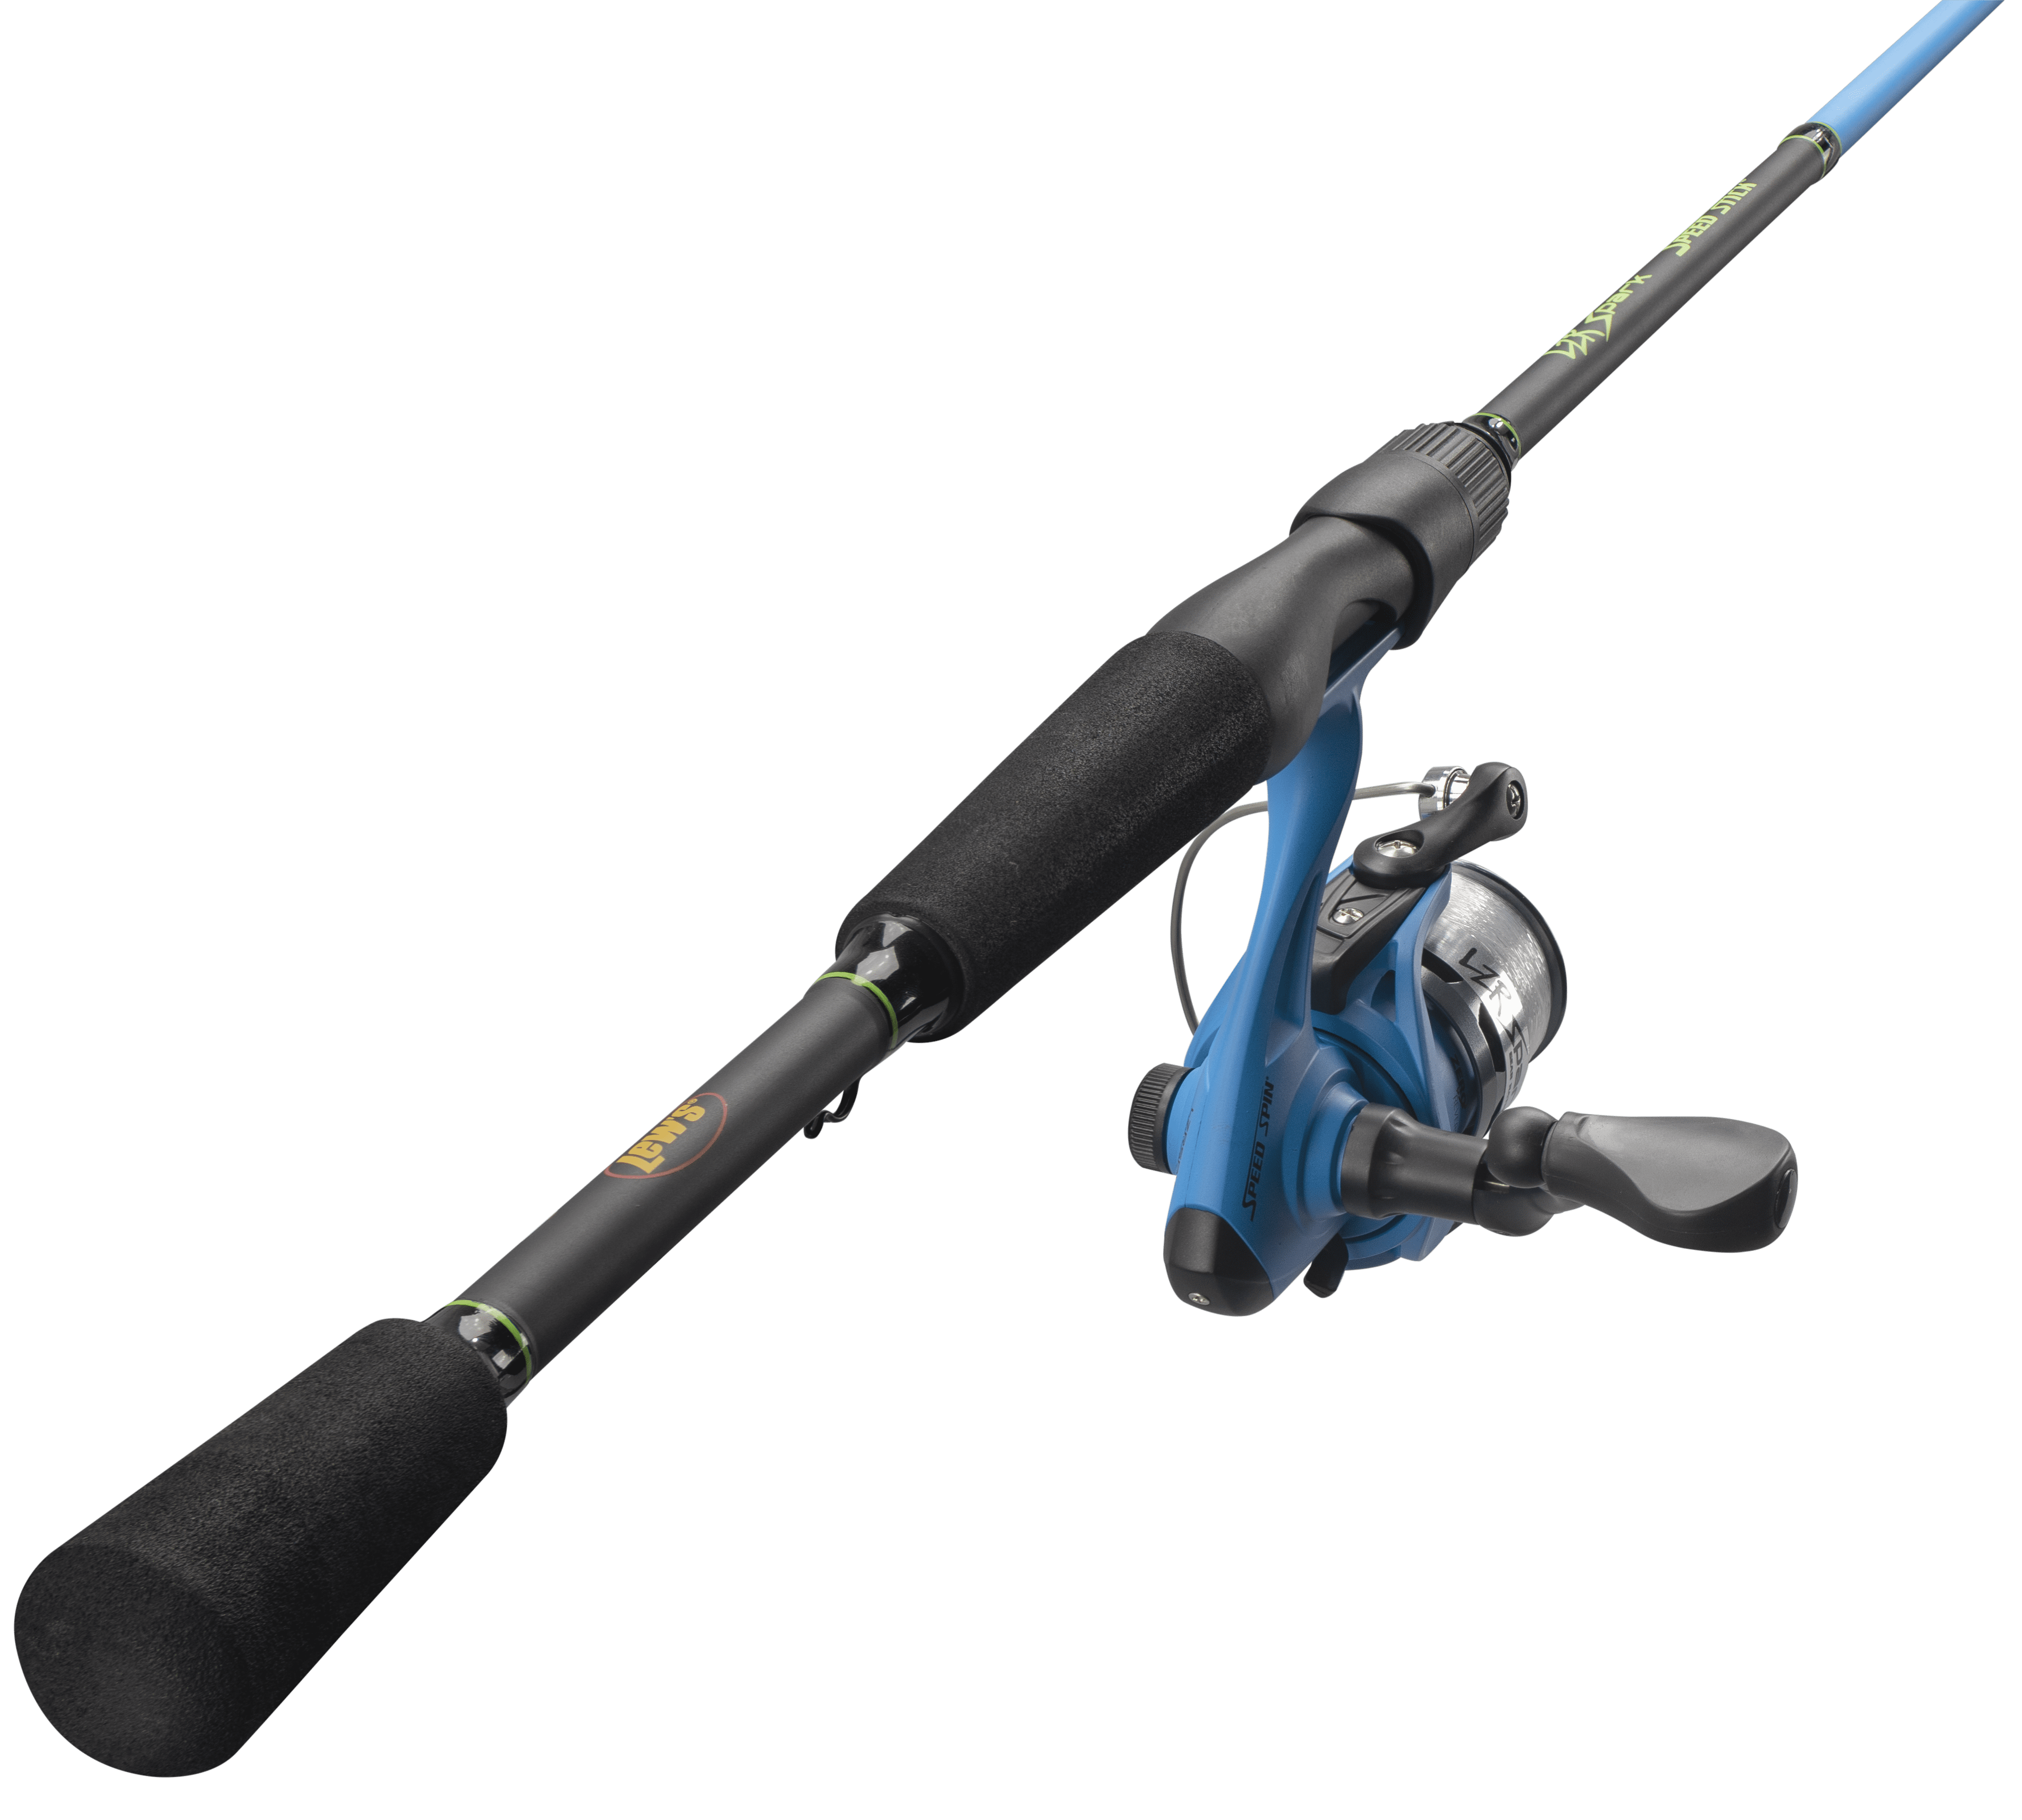 Lew's LZR Spark 6'6 Medium Action Spinning Rod and Reel Fishing